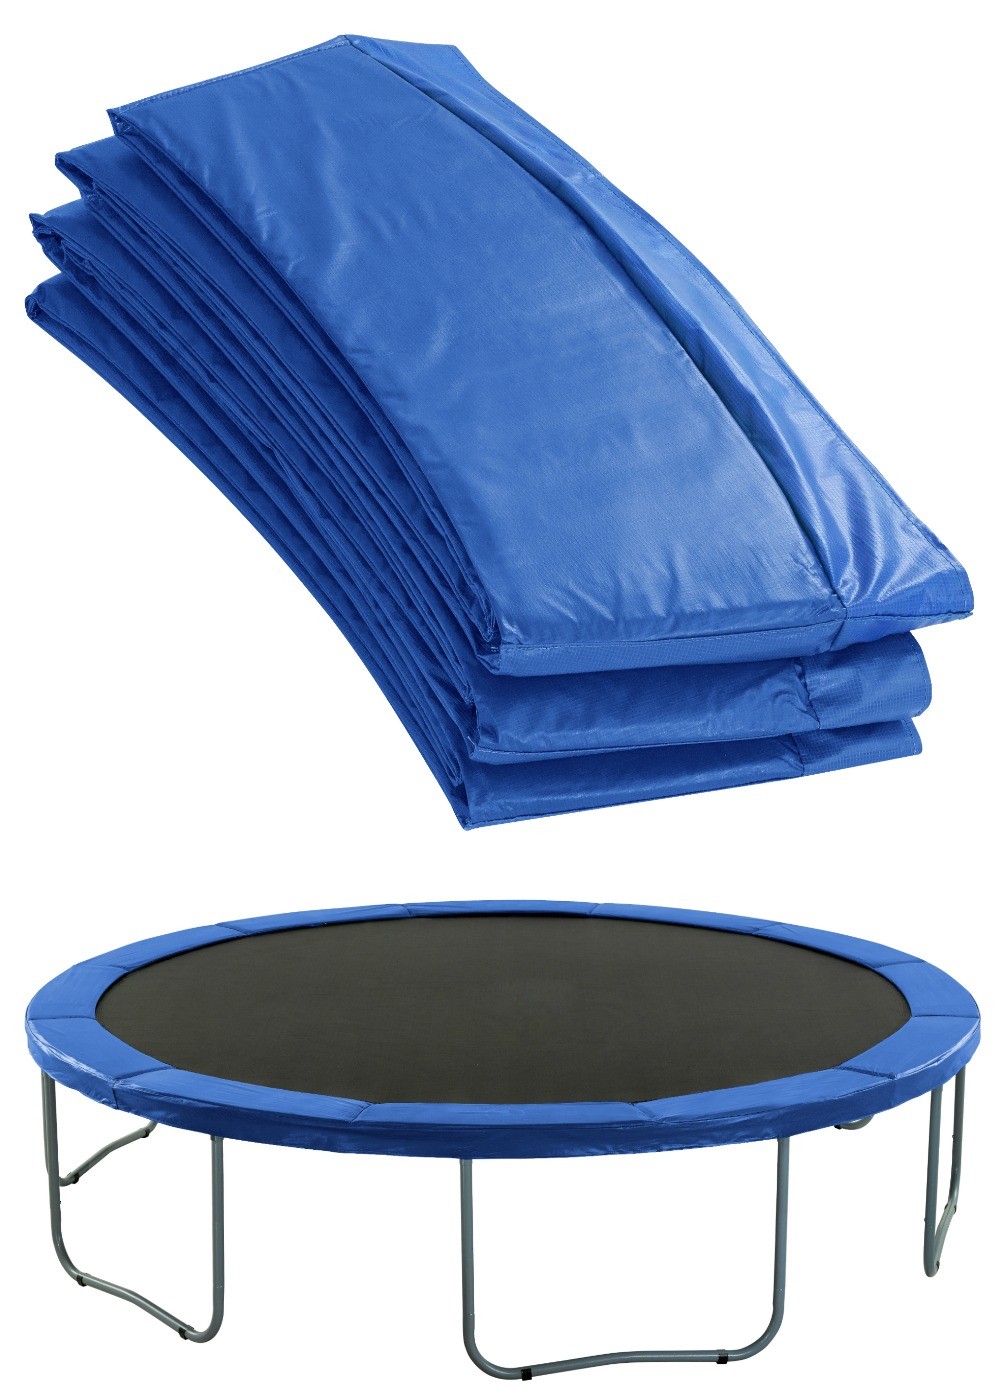 Premium Trampoline Replacement Safety Pad (Spring Cover) Fits for 8 FT. Round Frames- 3/4" Foam - Blue